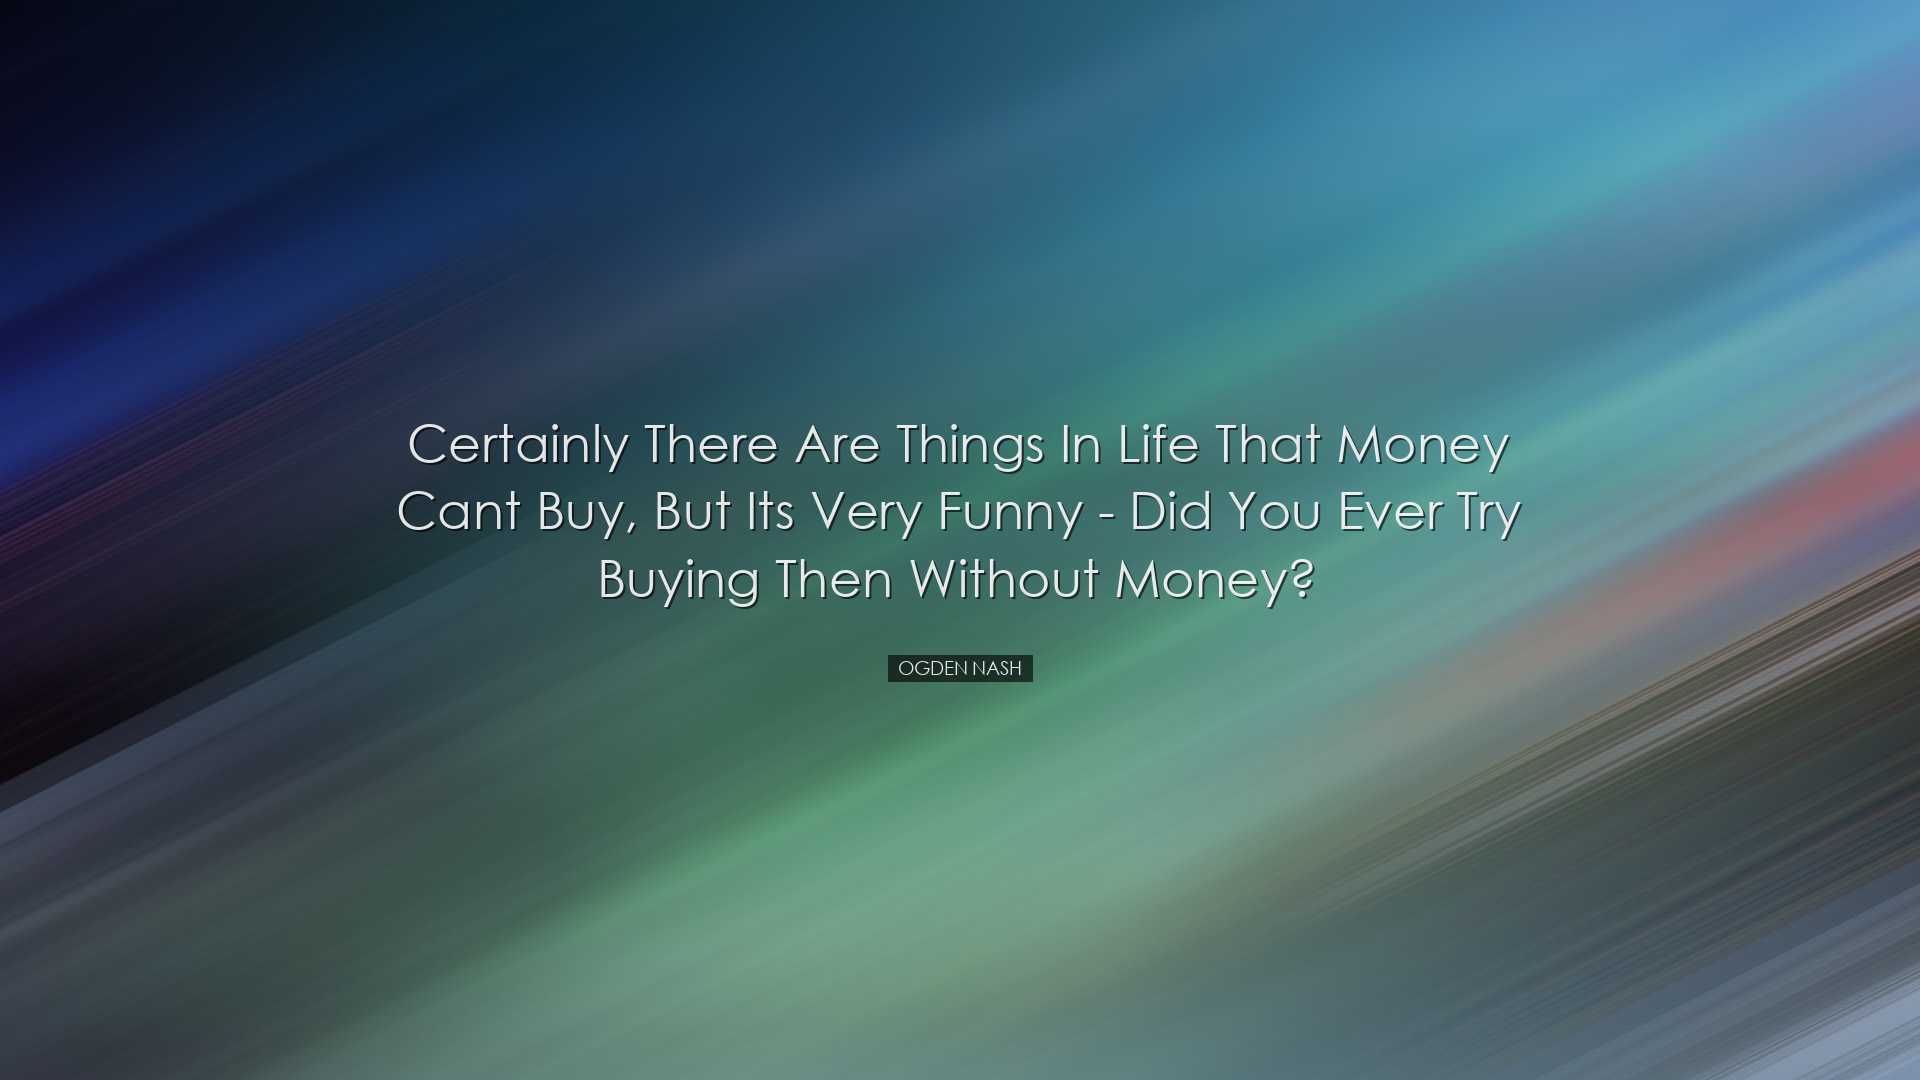 Certainly there are things in life that money cant buy, but its ve